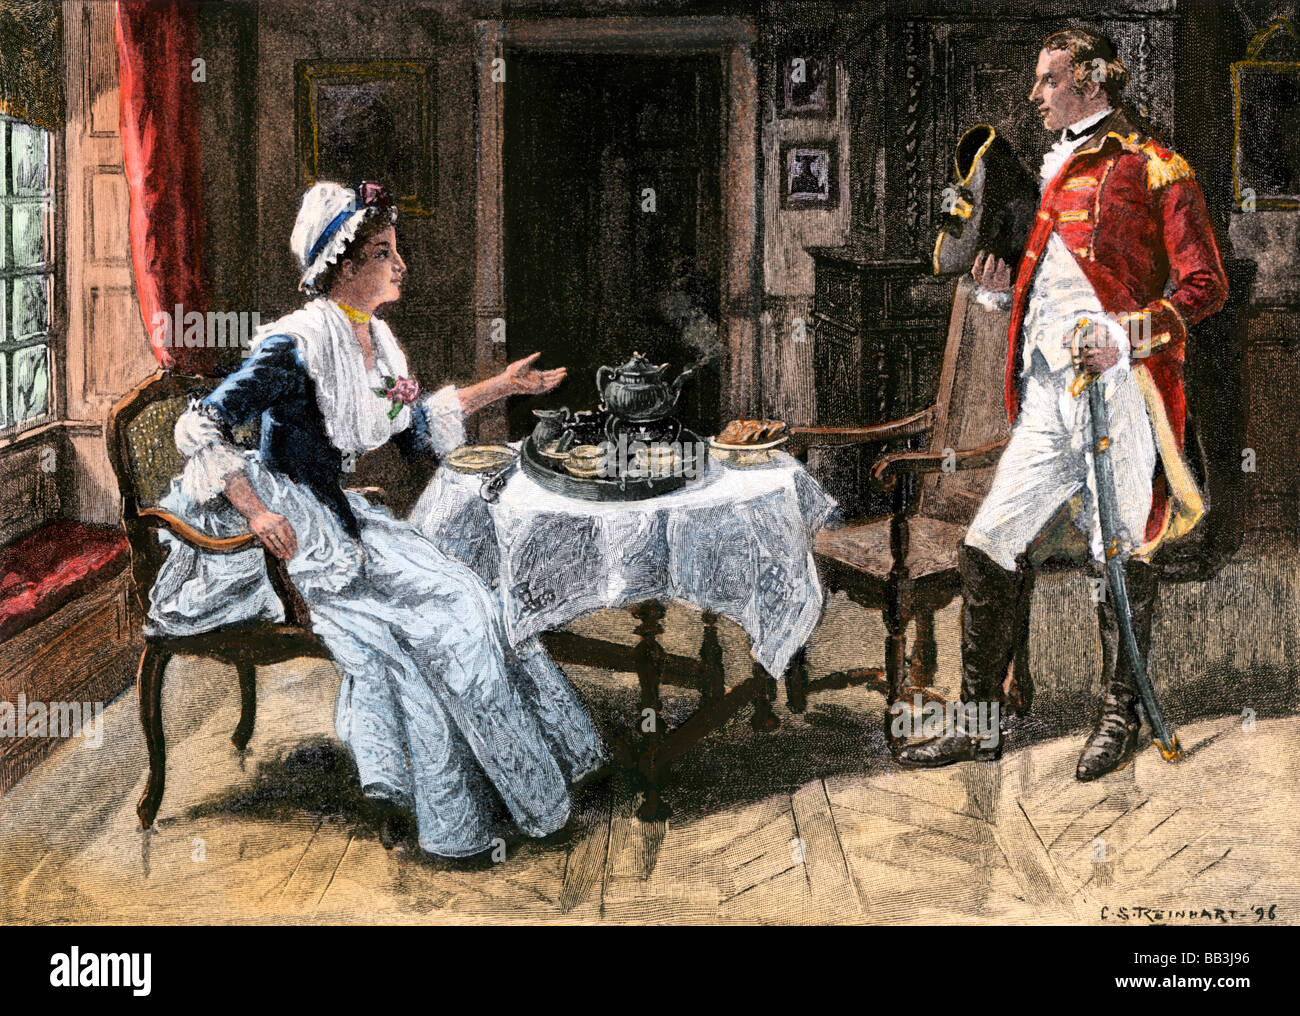 Patriotic American woman gathering information from a British officer American Revolution. Hand-colored halftone of an illustration Stock Photo